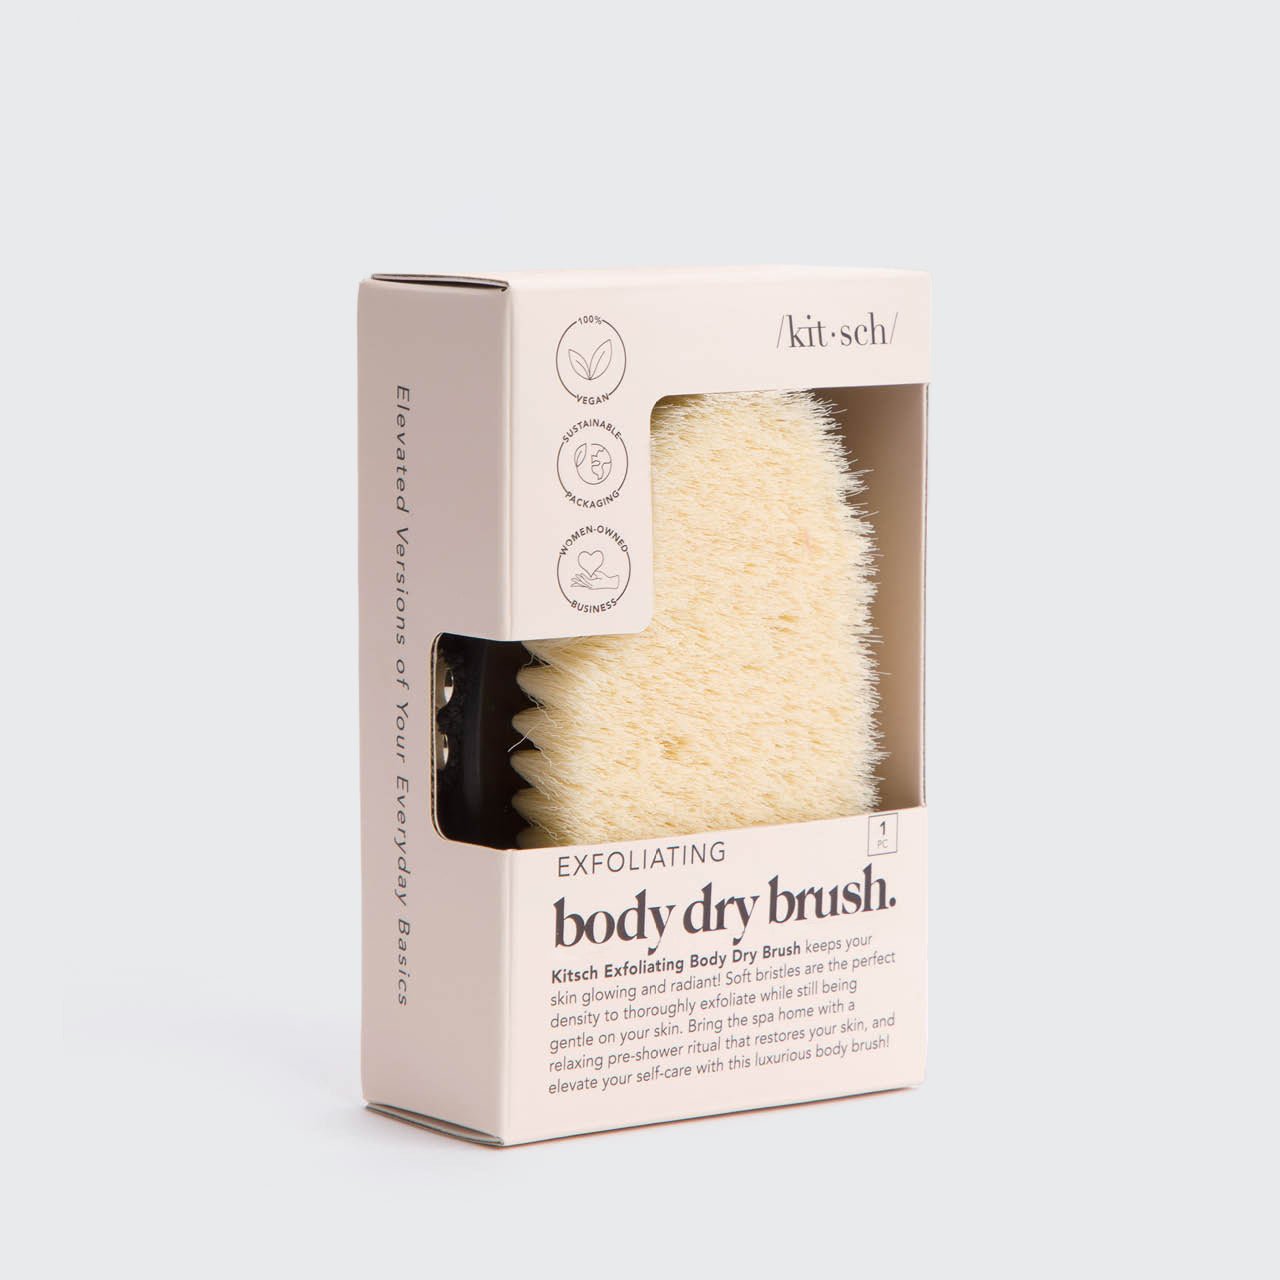 Kitsch - Body Dry Brush - all things being eco - vegan spa accessories - natural skincare - natural exfoliation